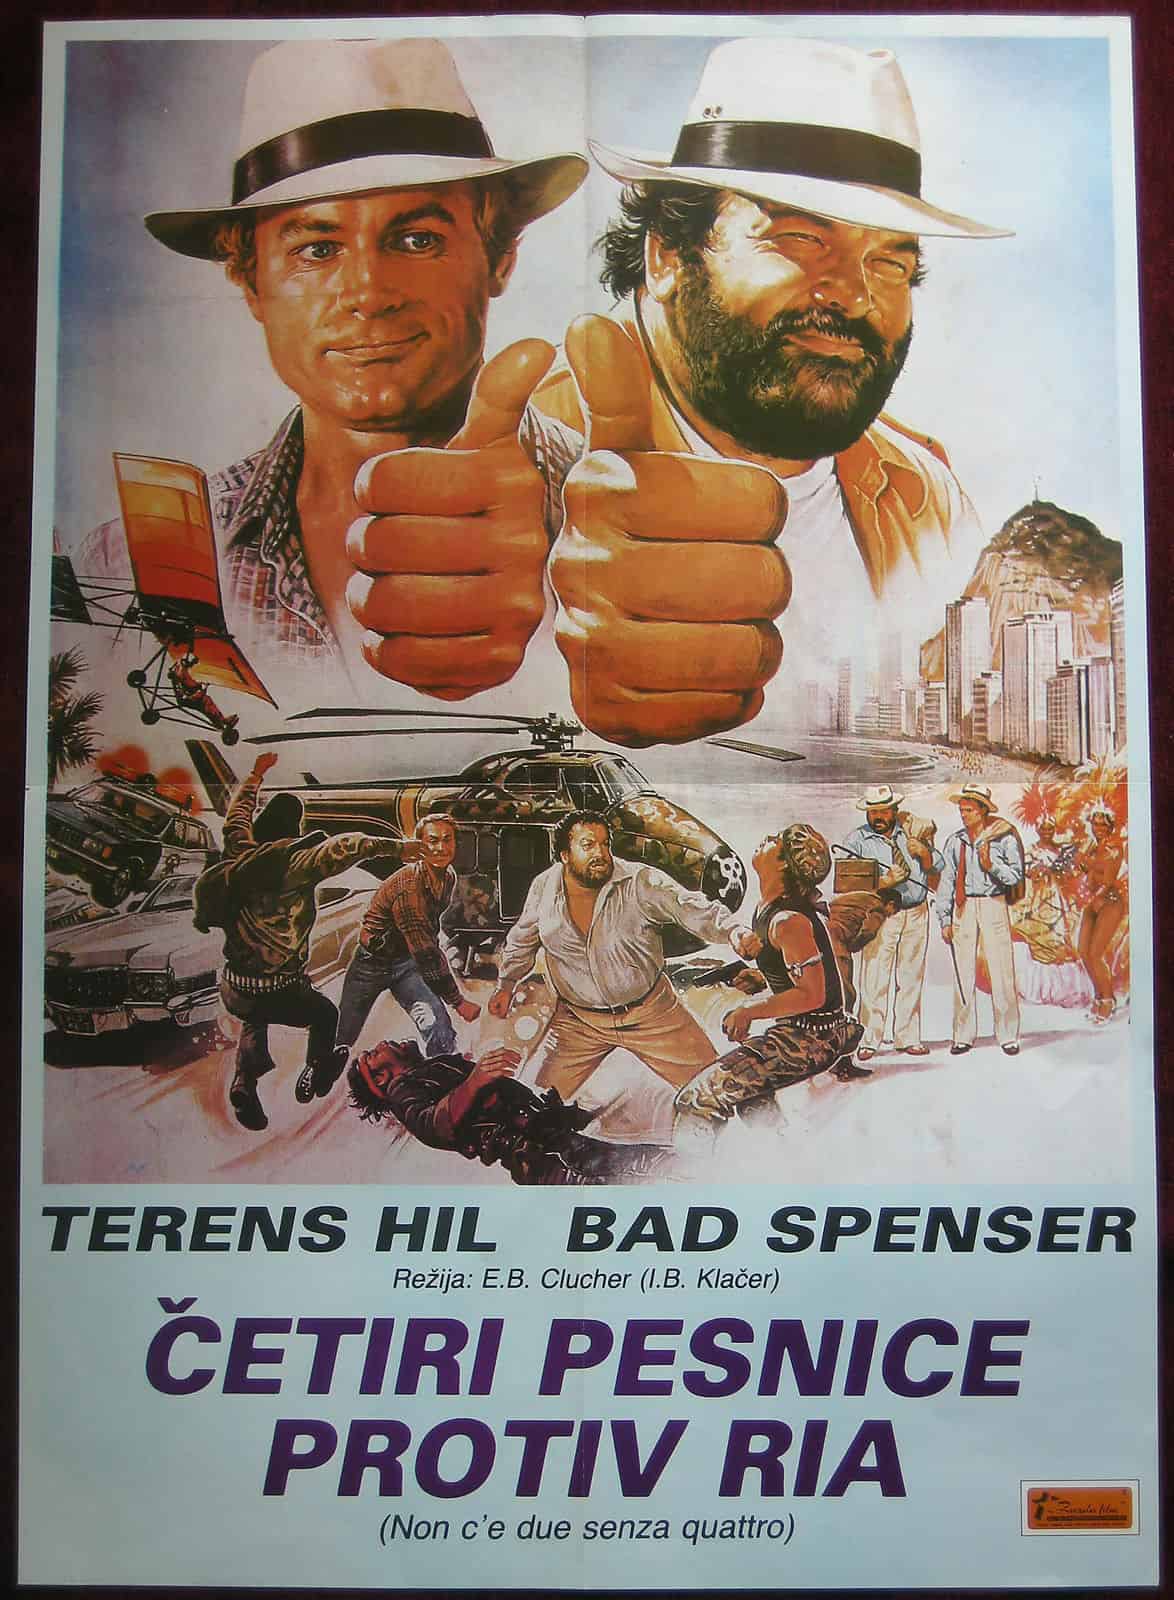 1984 Original Movie Poster Double Trouble Enzo Barboni Bud Spencer